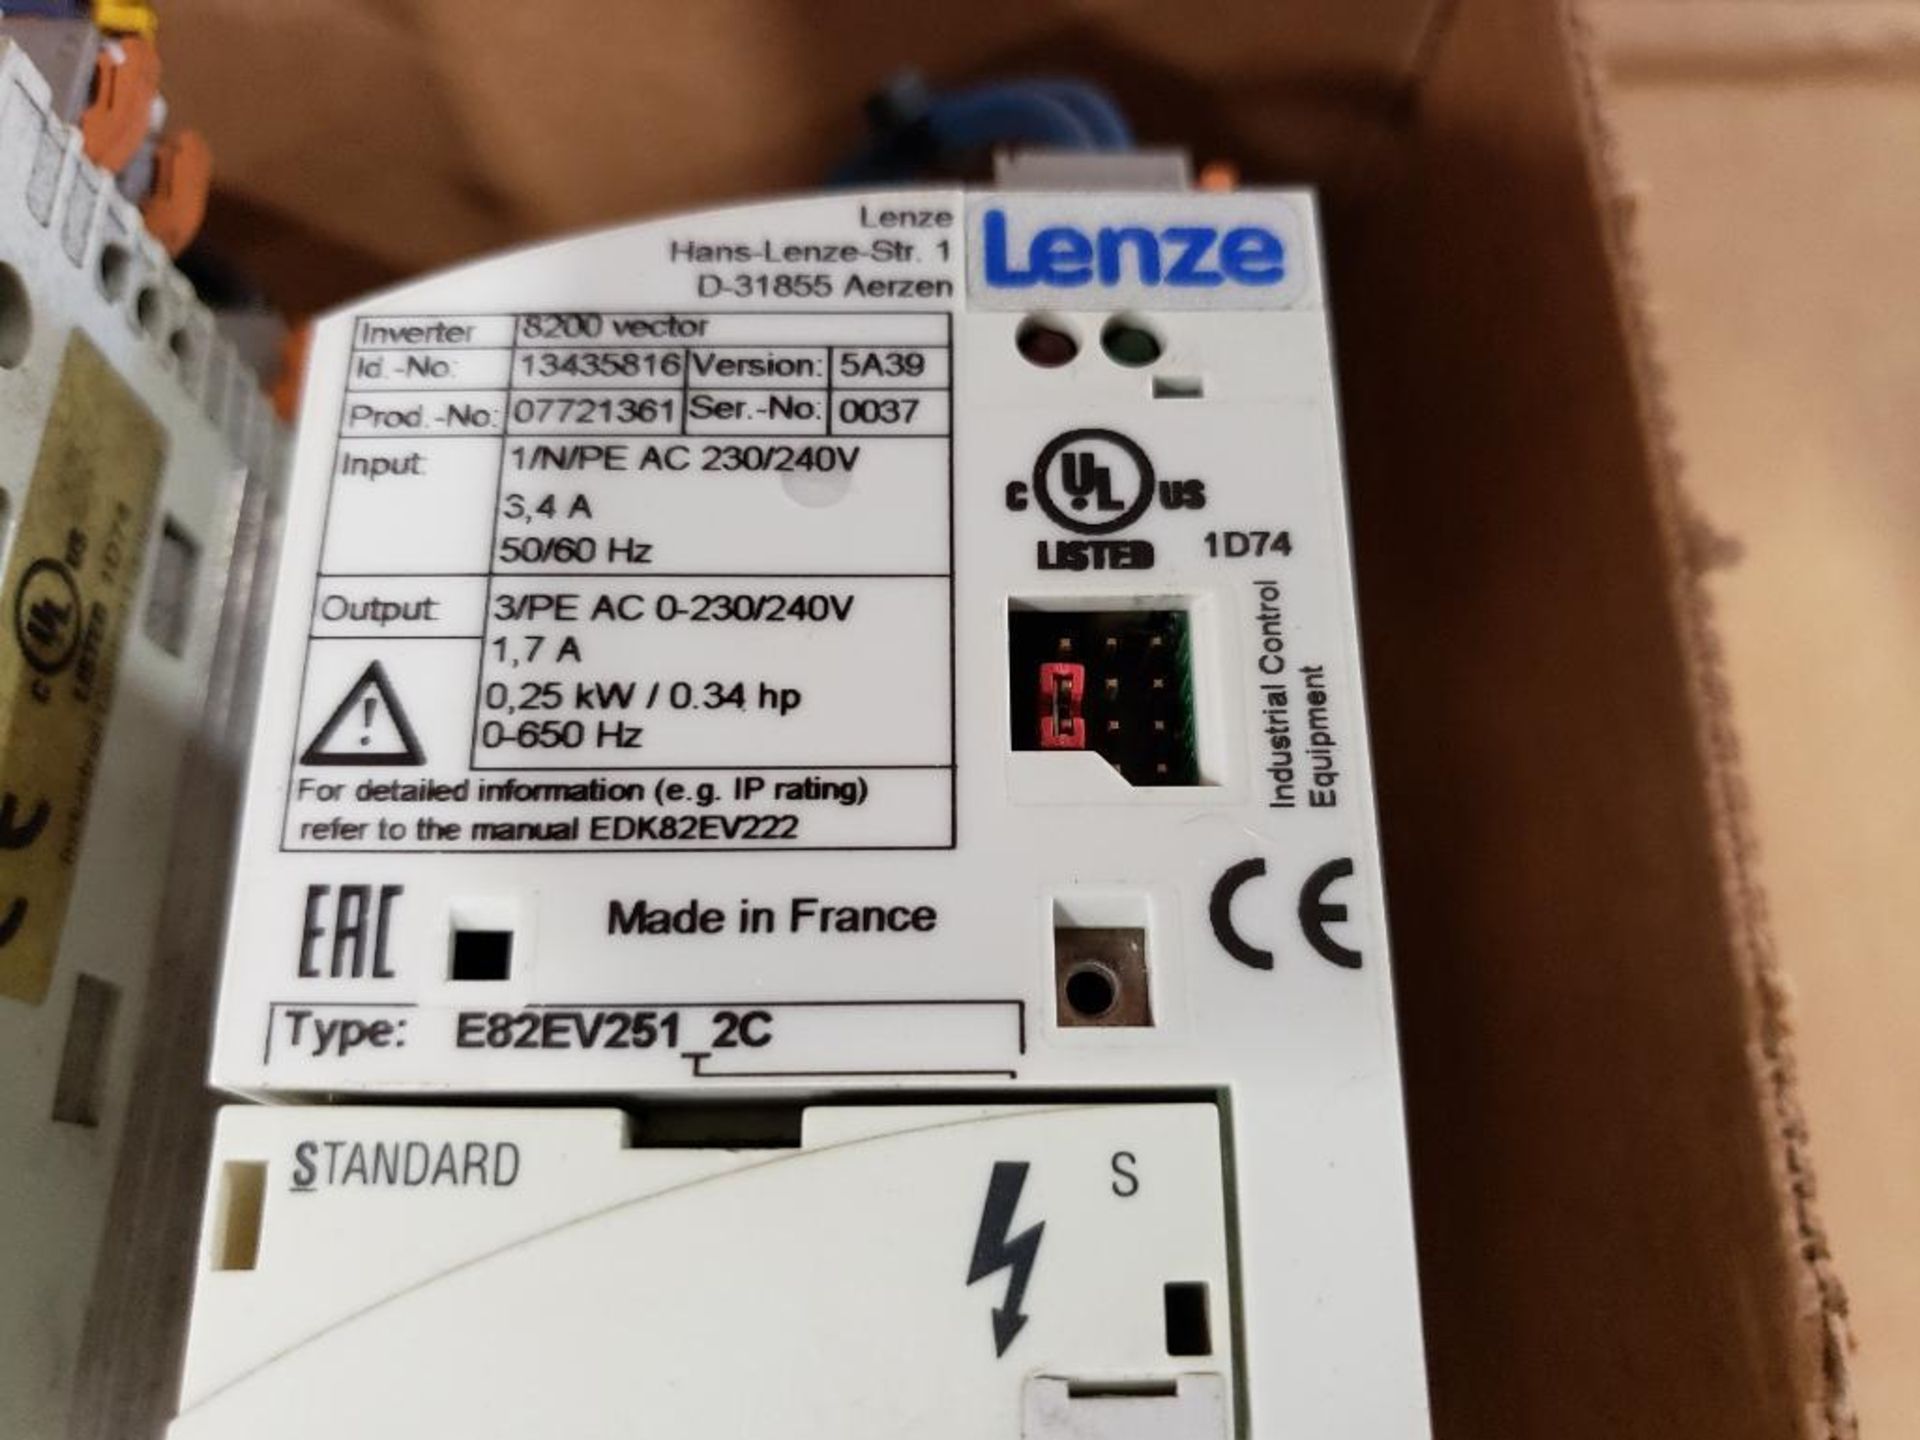 Qty 2 - Lenze 8200 vector drive. Includes Qty 2 - E82ZBC controller. - Image 2 of 5